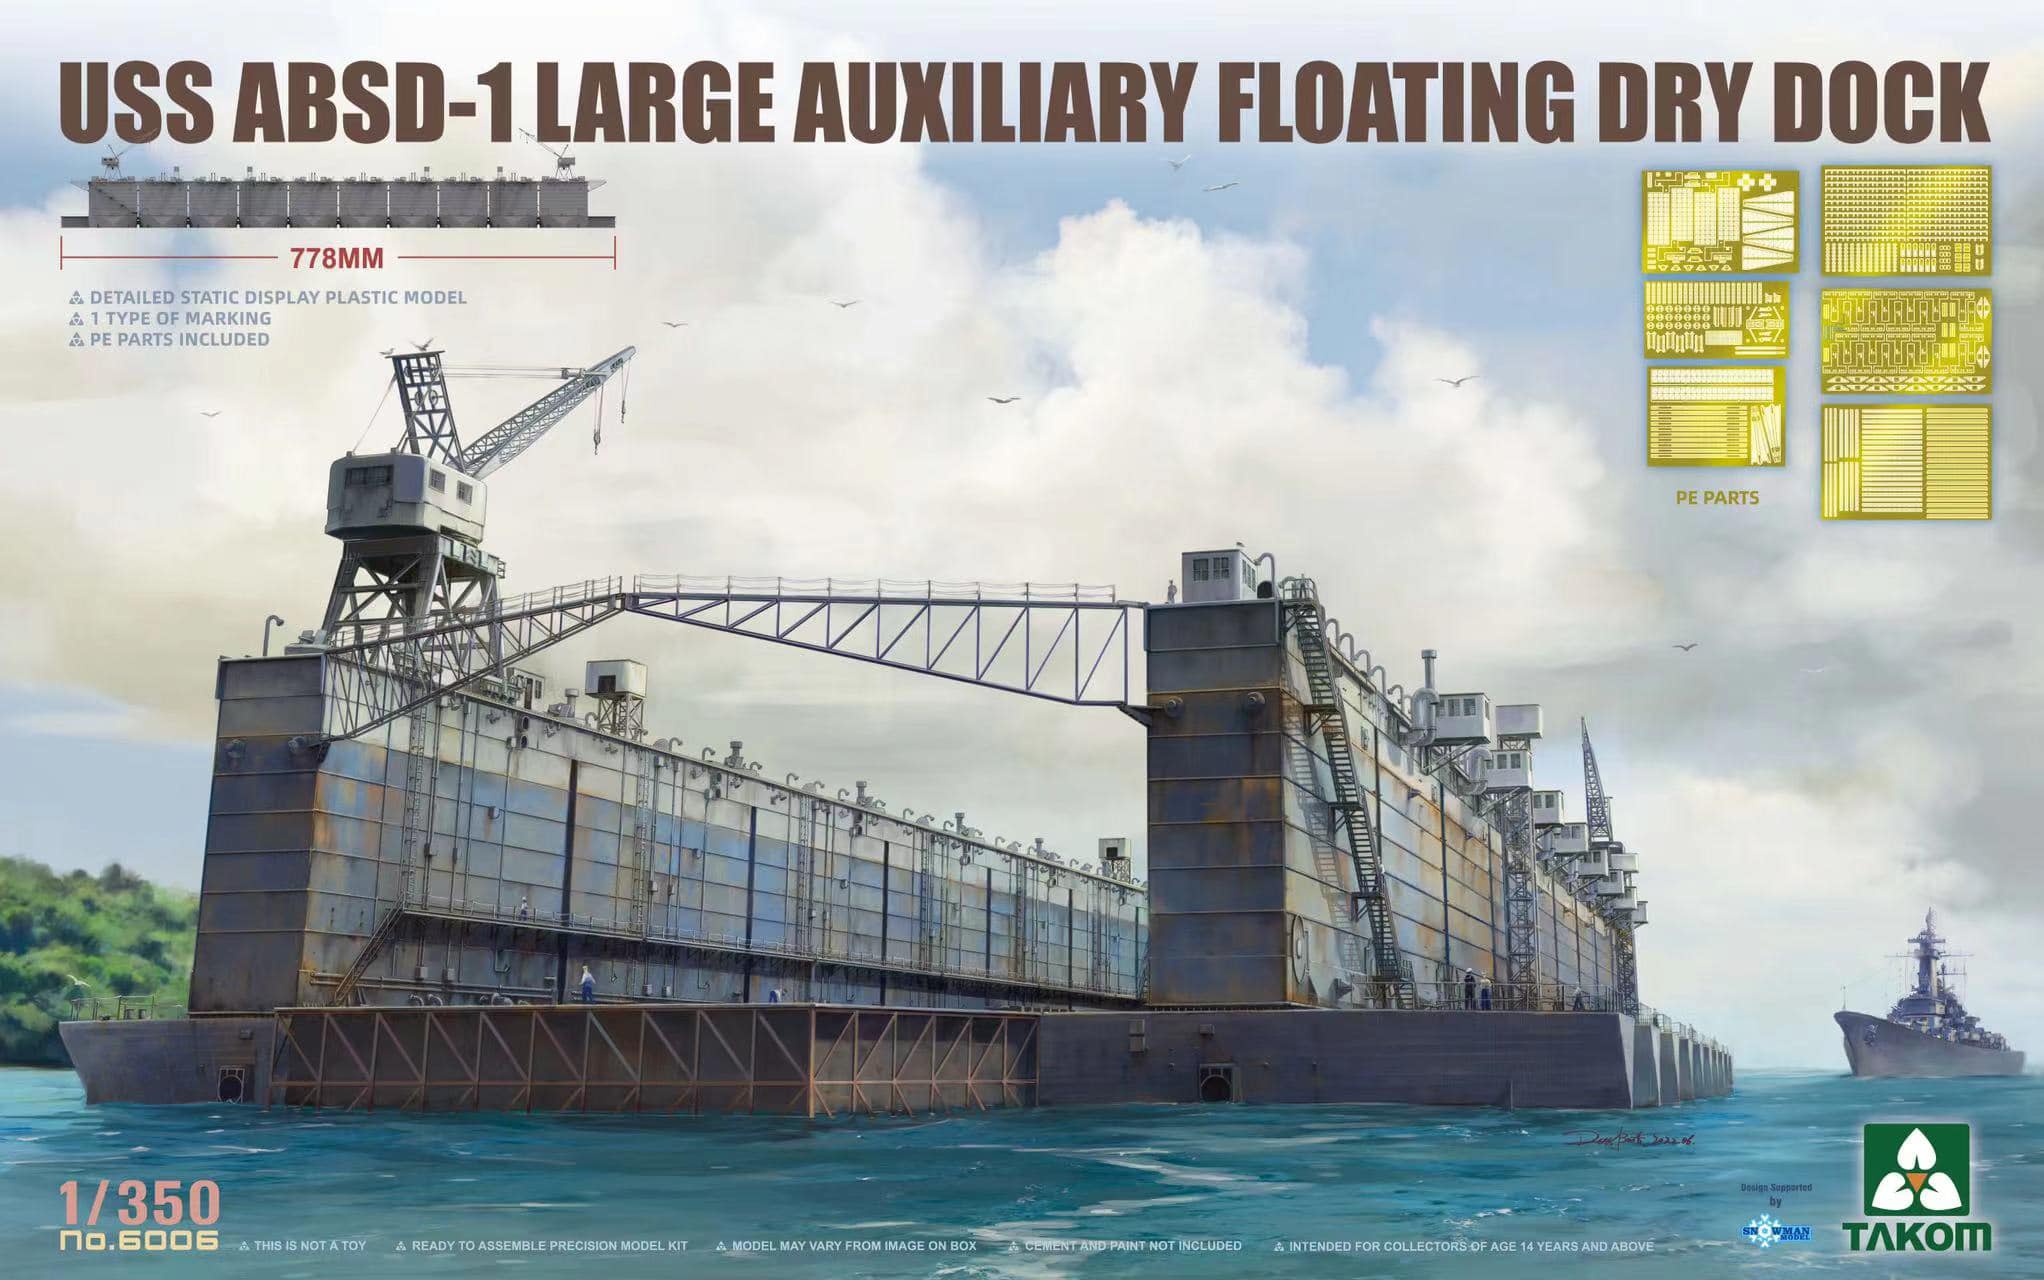 Fotografie 1/350 USS ABSD-1 Large Auxiliary Floating Dry Dock